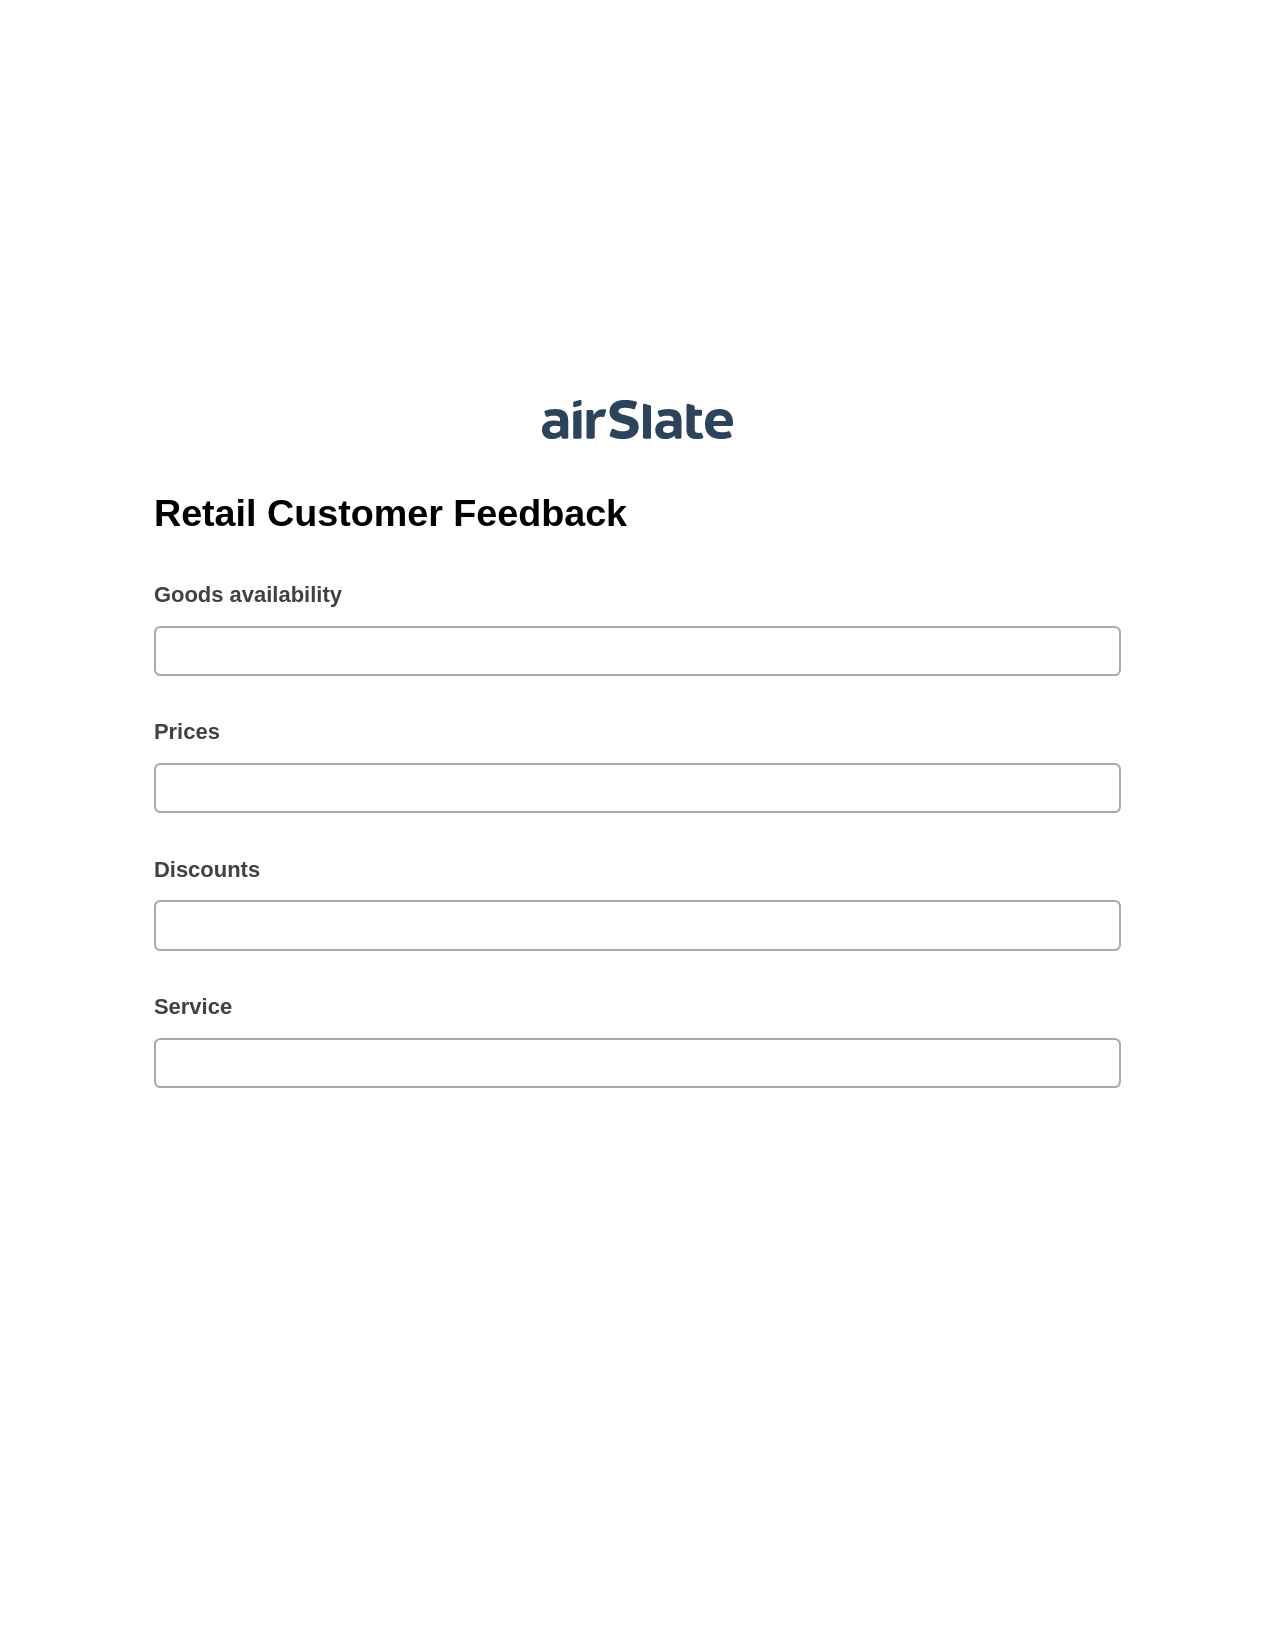 Retail Customer Feedback Pre-fill from Salesforce Records with SOQL Bot, Update Salesforce Record Bot, Export to NetSuite Record Bot